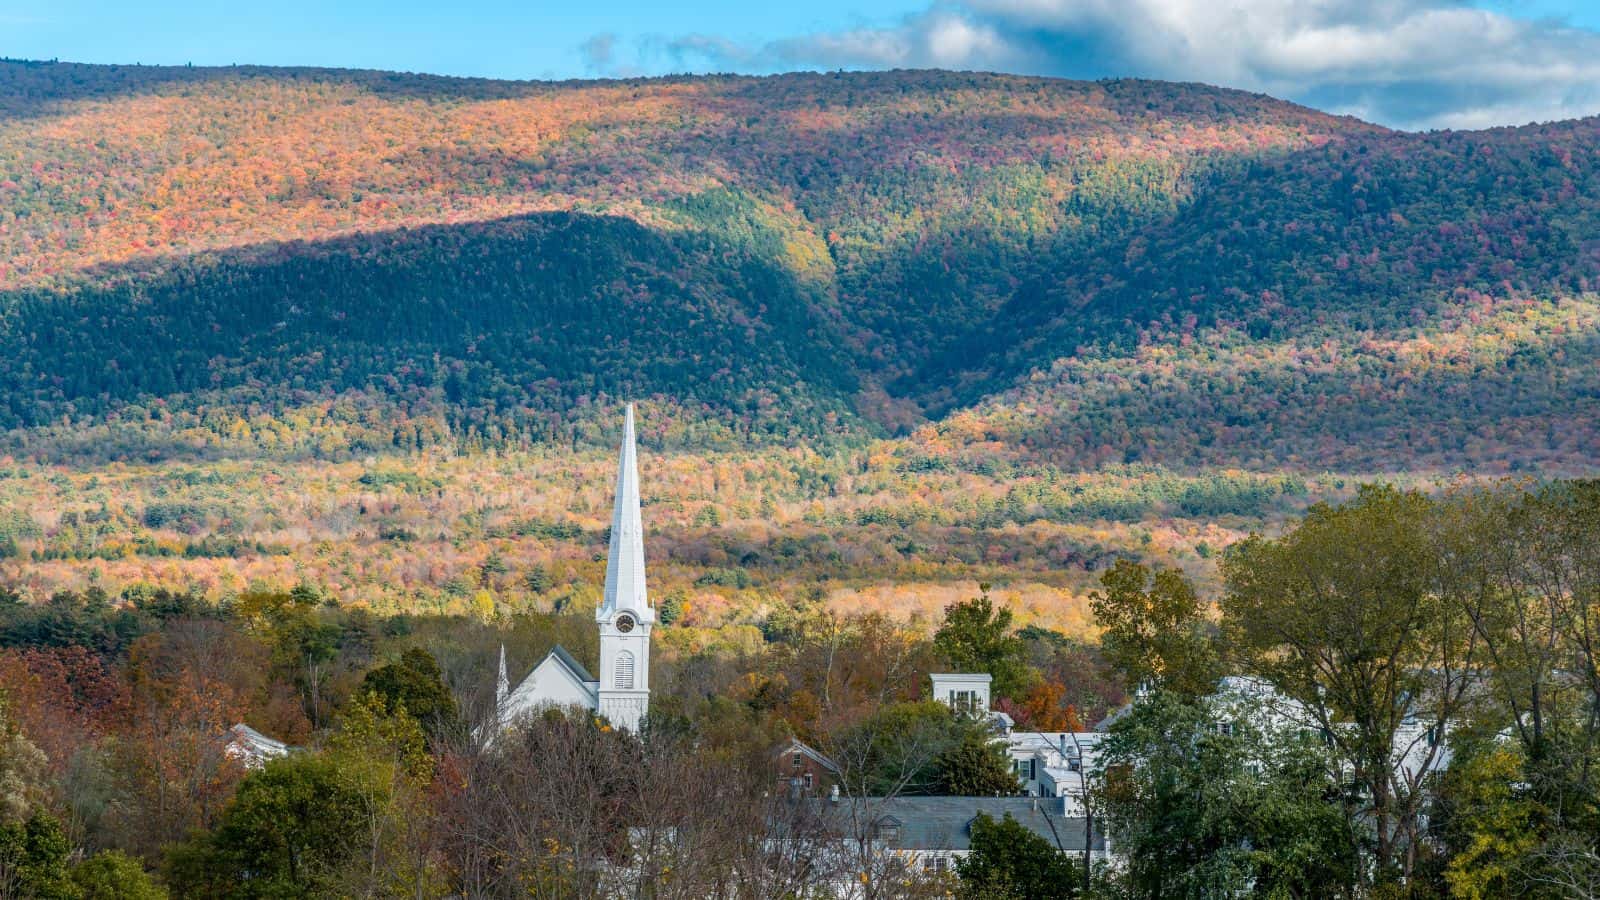 <p>Hugged by the Green and Taconic Mountains, Manchester, Vermont is a popular leaf-peeping locale in New England that shouldn’t be overlooked in the summer. For some serious scenery, drive to the peak of 3,848 <a href="https://equinoxmountain.com/" rel="nofollow external noopener noreferrer">Mount Equinox</a> (that’s right, no hiking required).</p><p>Later, see classic Vermont woodworking in action at Manchester Woodcraft, whose factory and retail shop allows visitors to observe carvers in action and shop for a few well-priced souvenirs.</p>